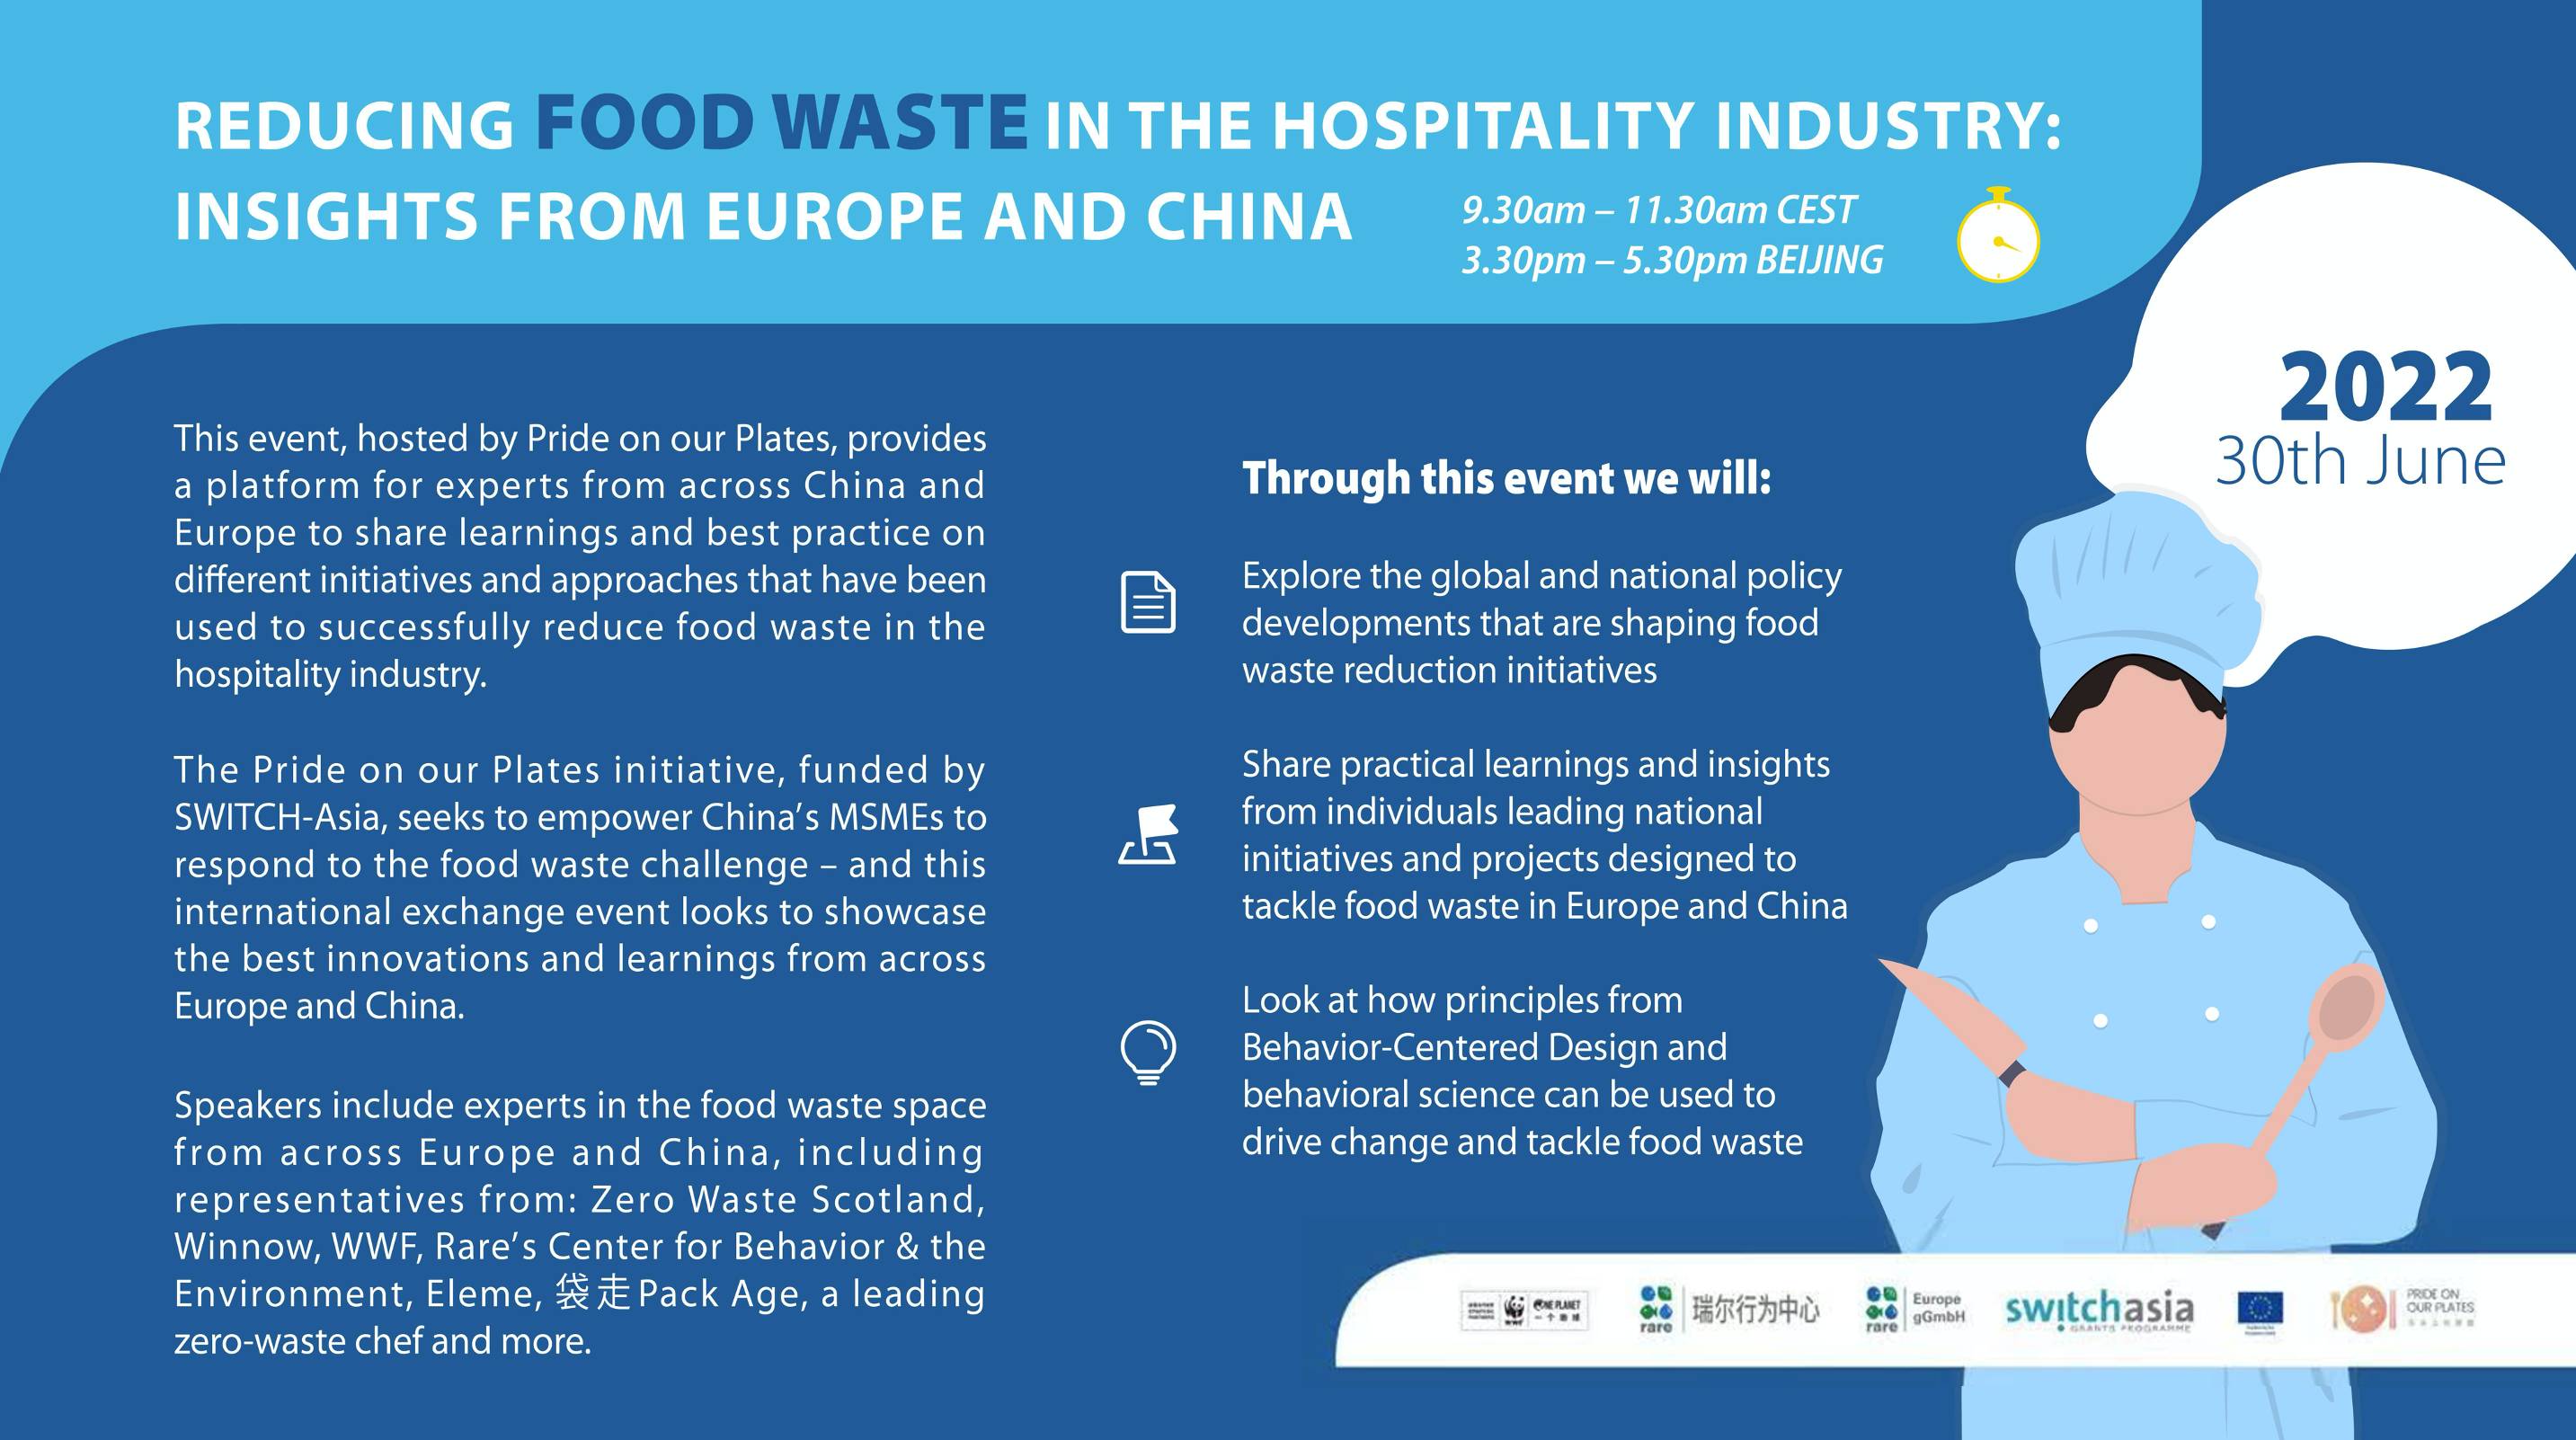 Reducing food waste in the hospitality industry